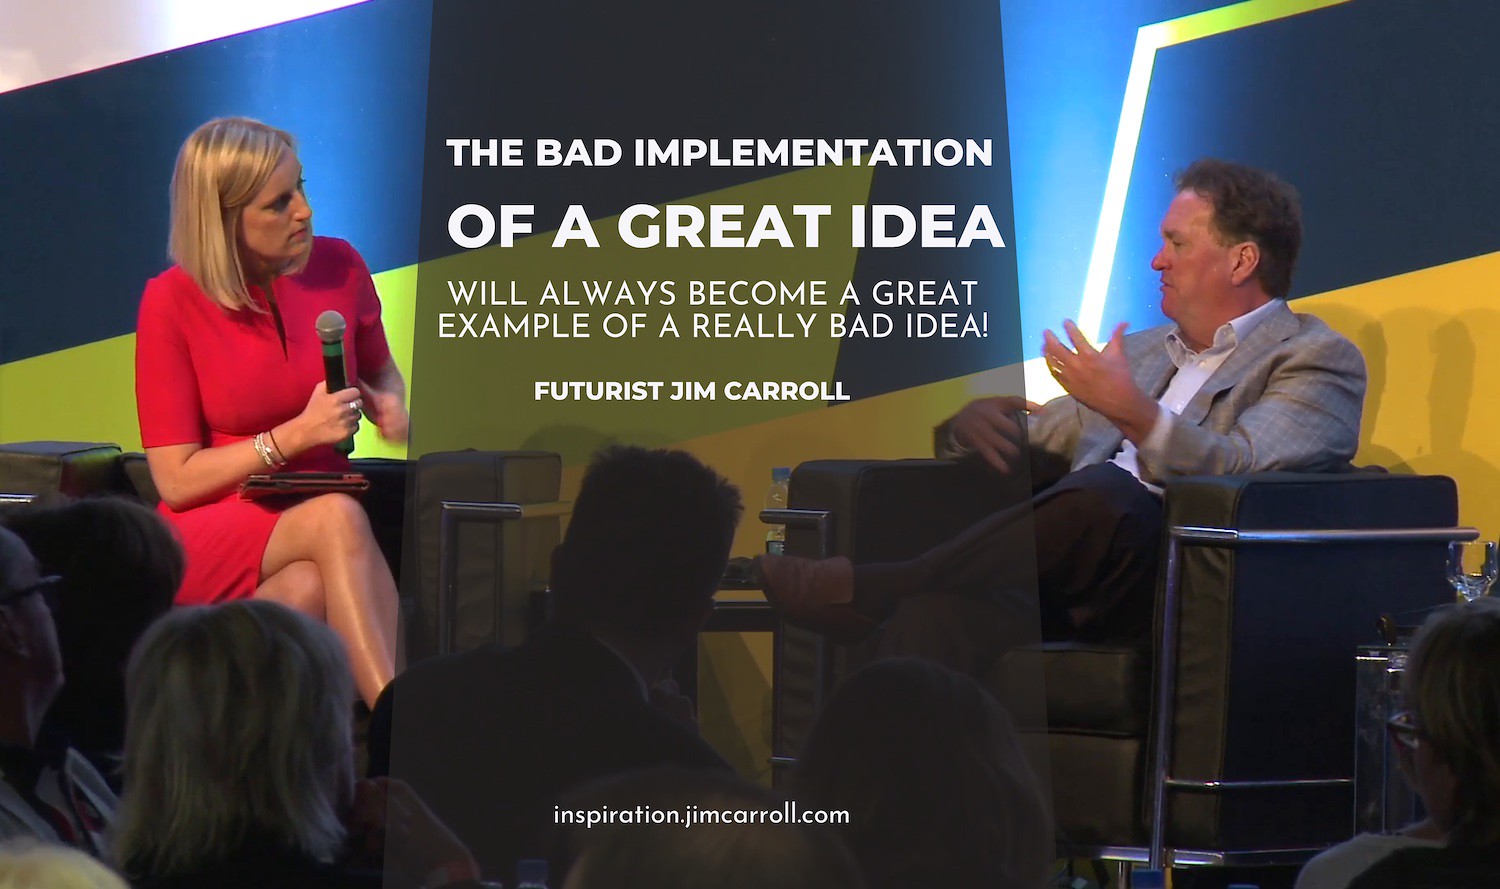 "The bad implementation of a great idea will always become a great example of a really bad idea!" - Futurist Jim Carroll